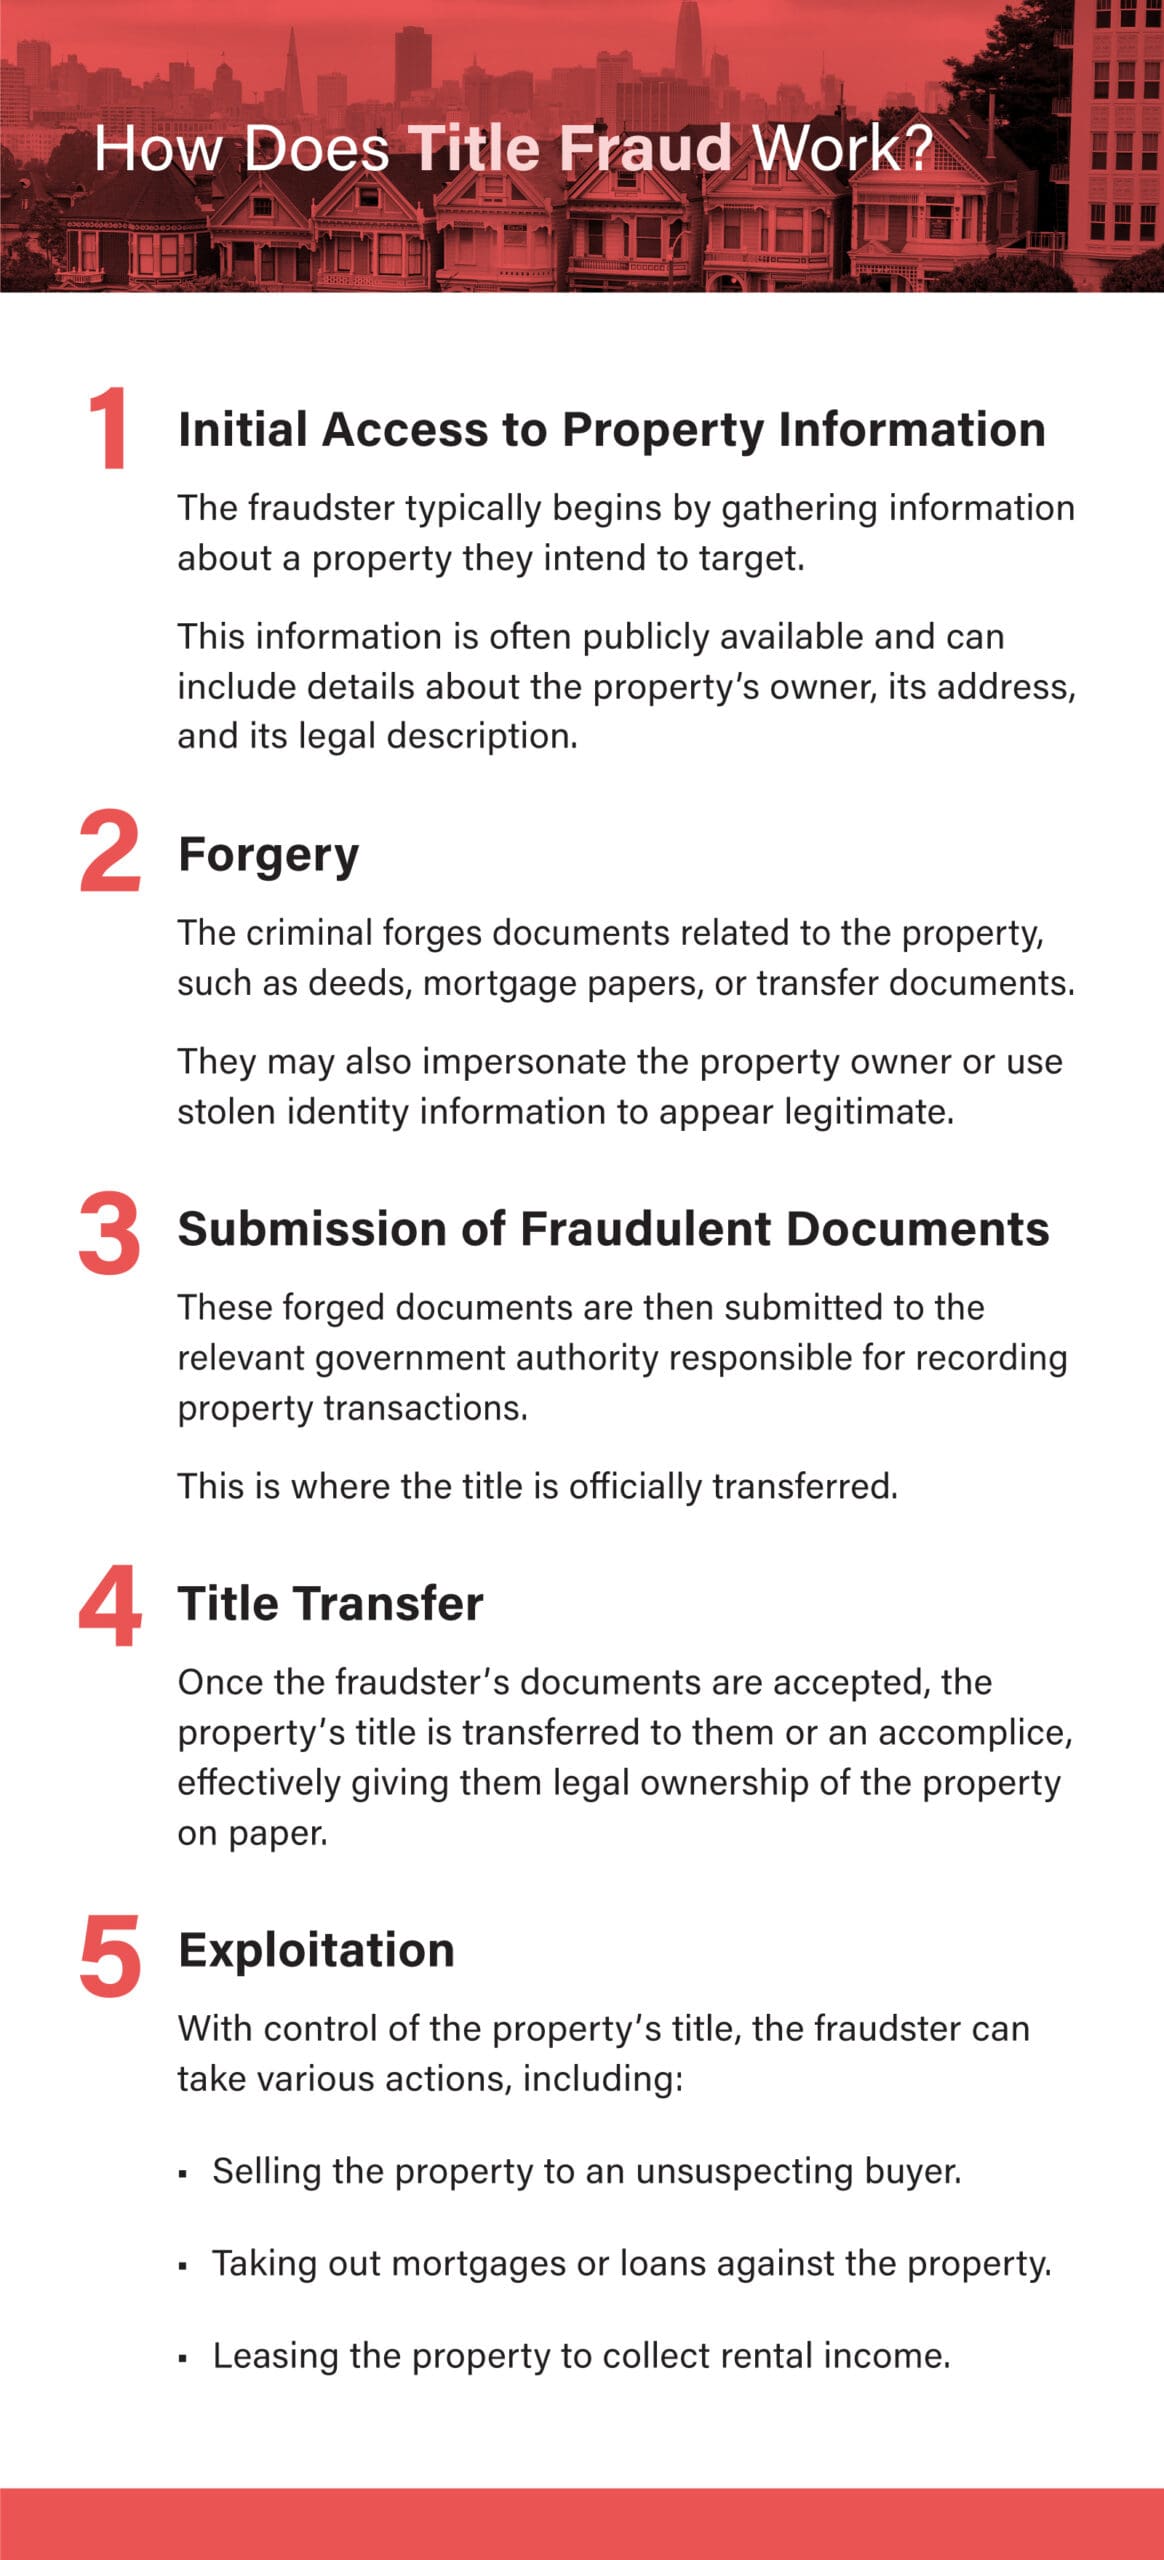 How does title fraud work?